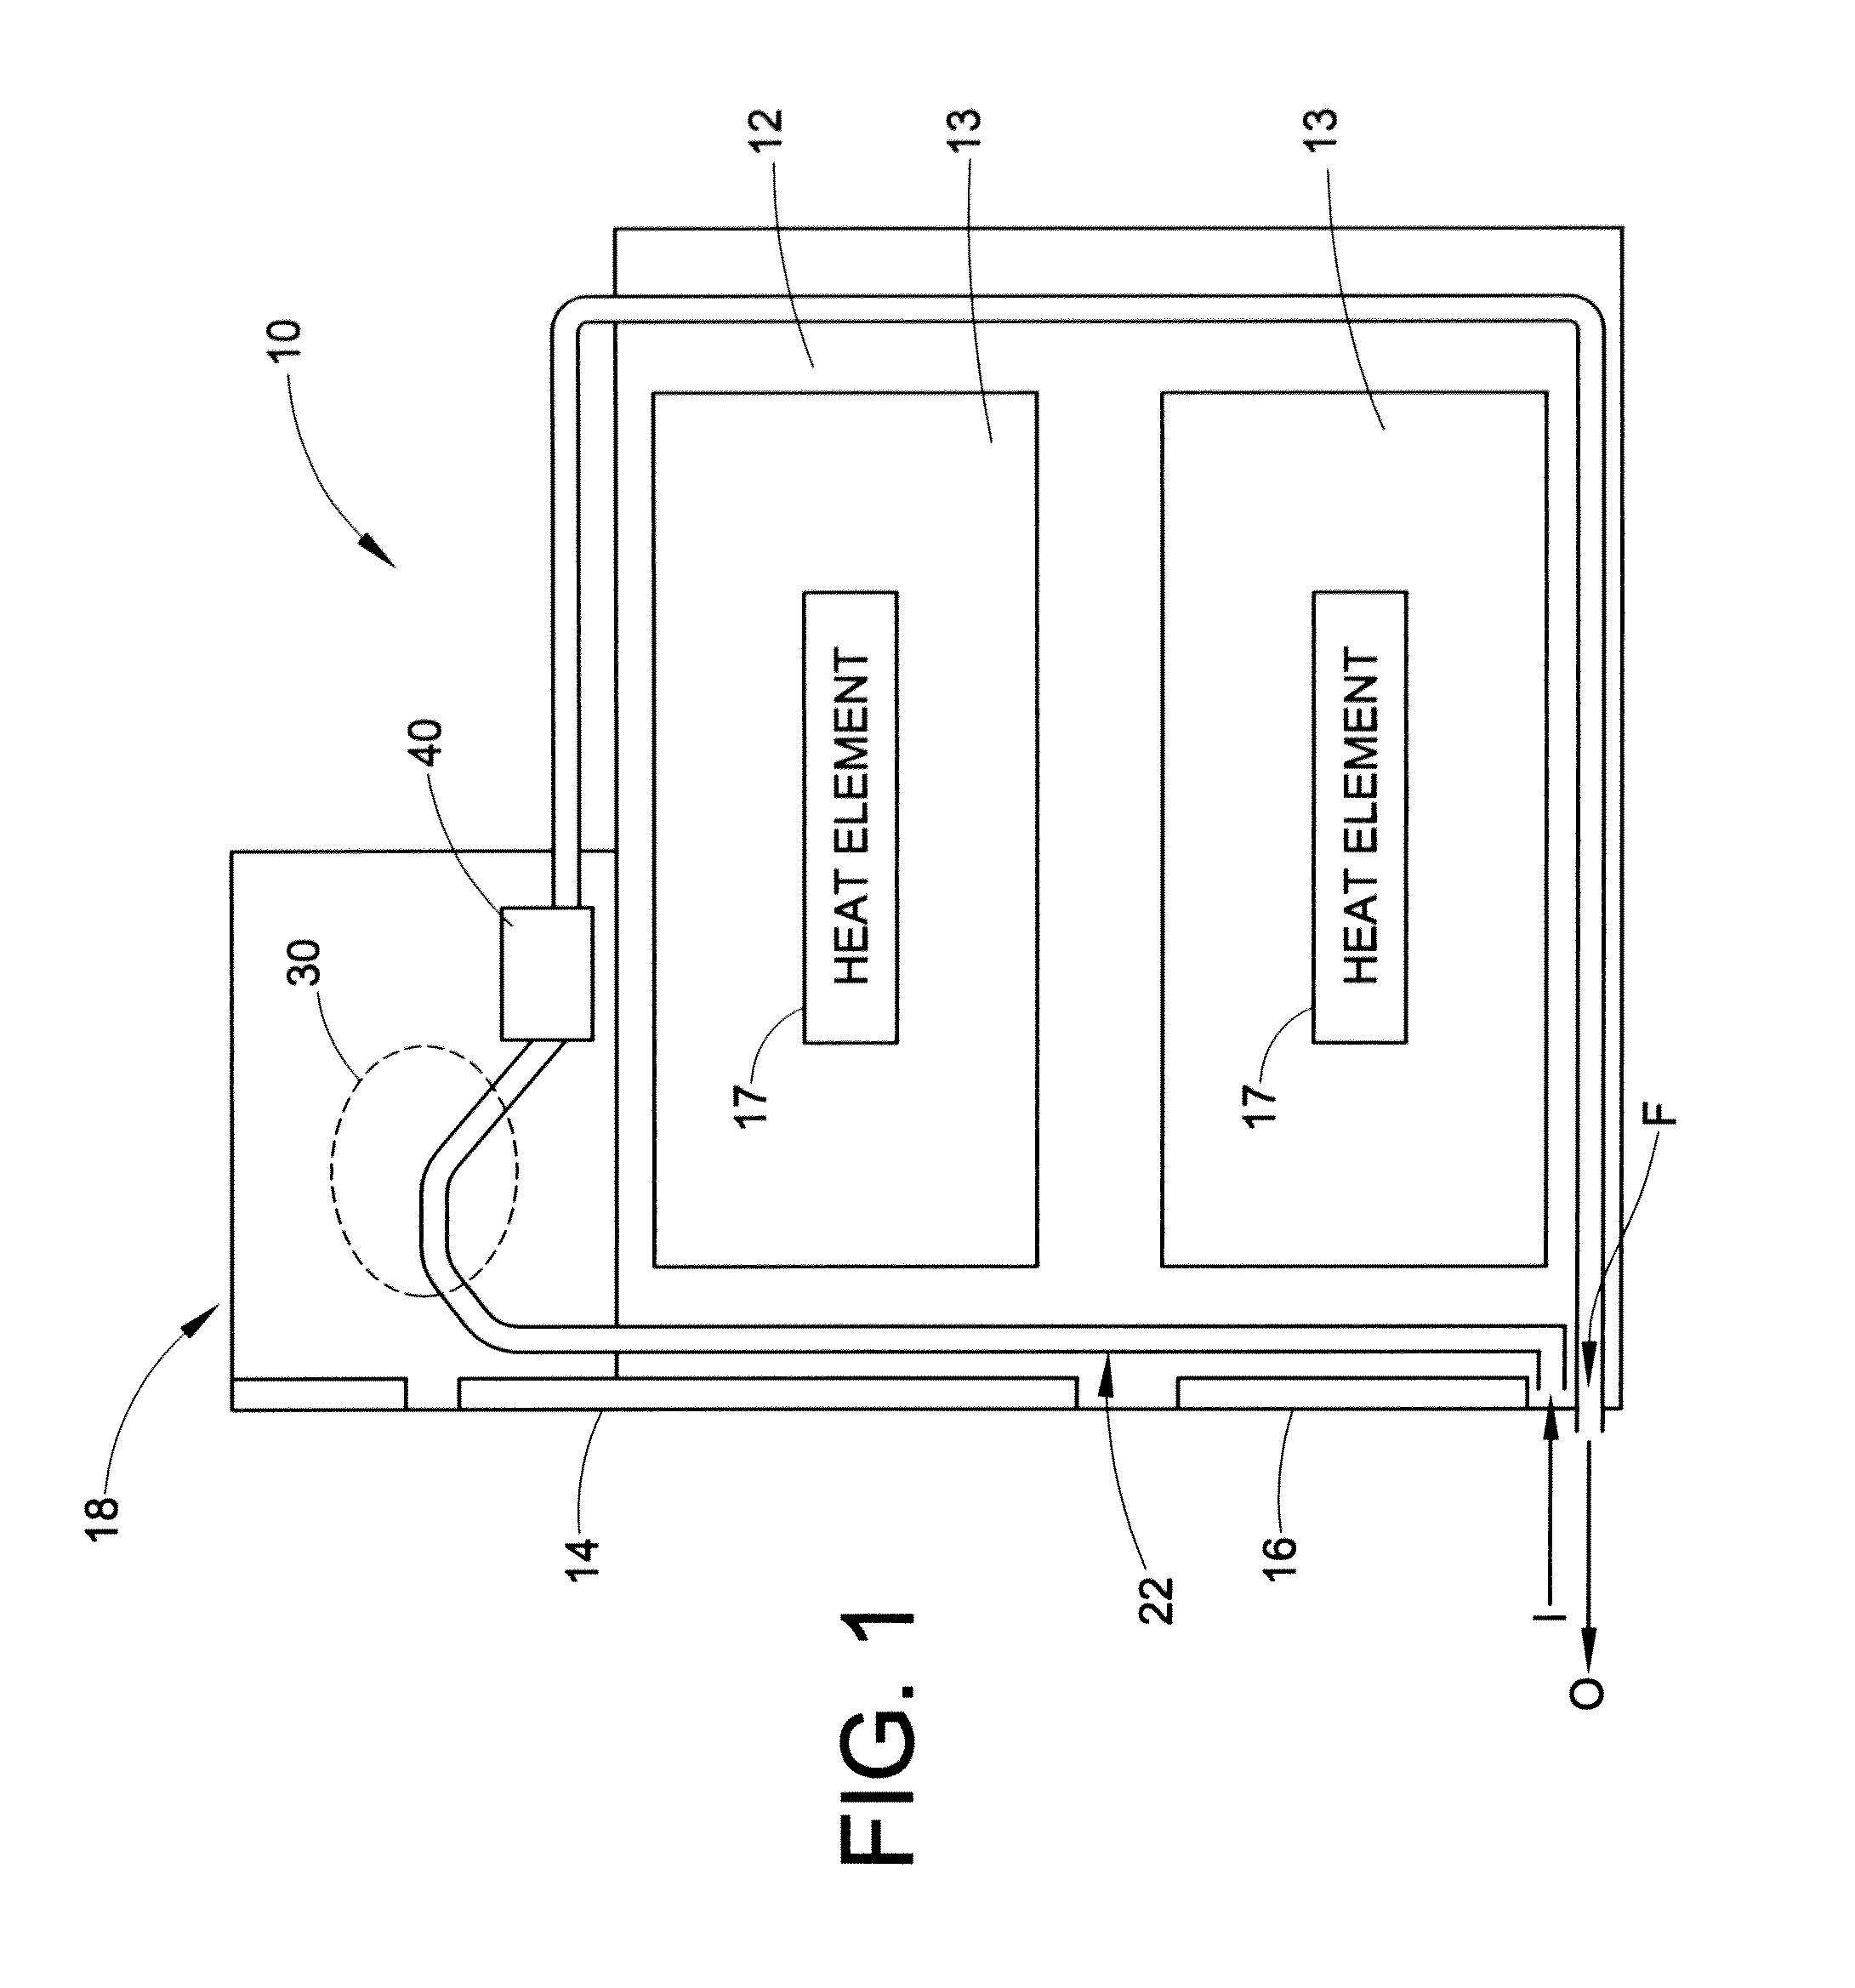 Appliance airflow detection using differential pressure sensing